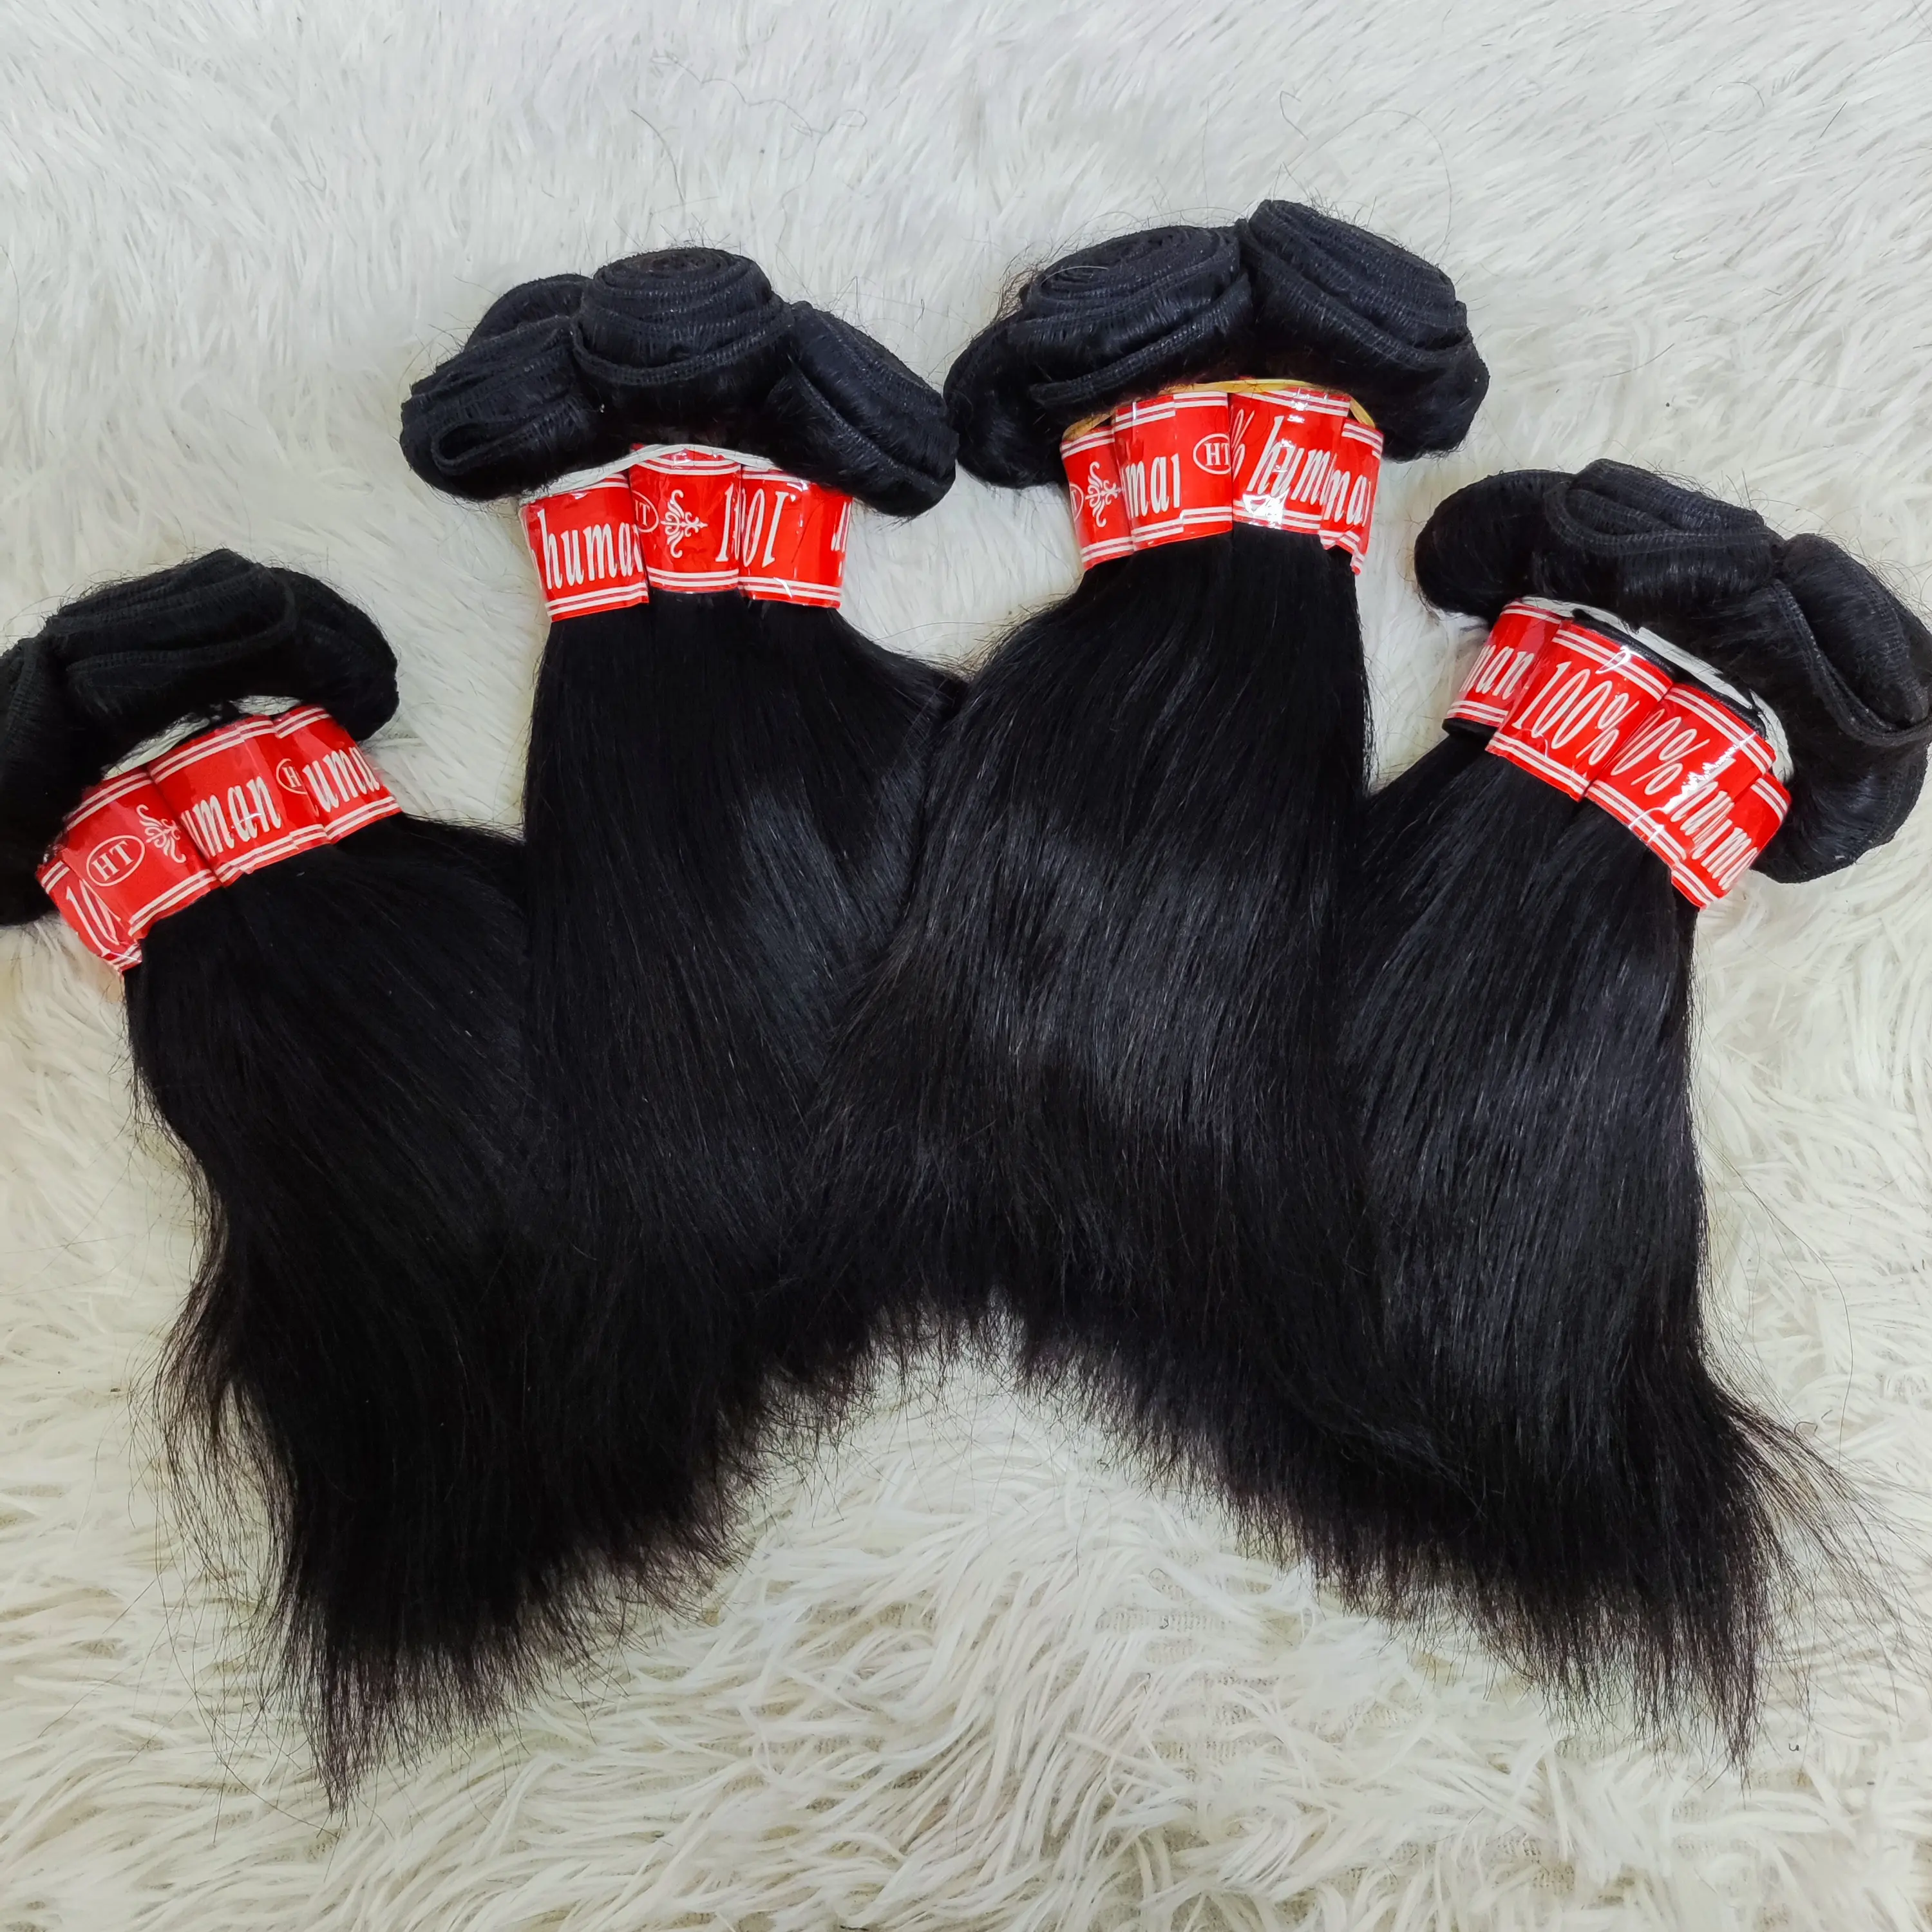 Letsfly- Straight Remy Hair Extensions 100% Human Hair Bundles Promotion Affordable Cheap Hair Weaves Wholesale